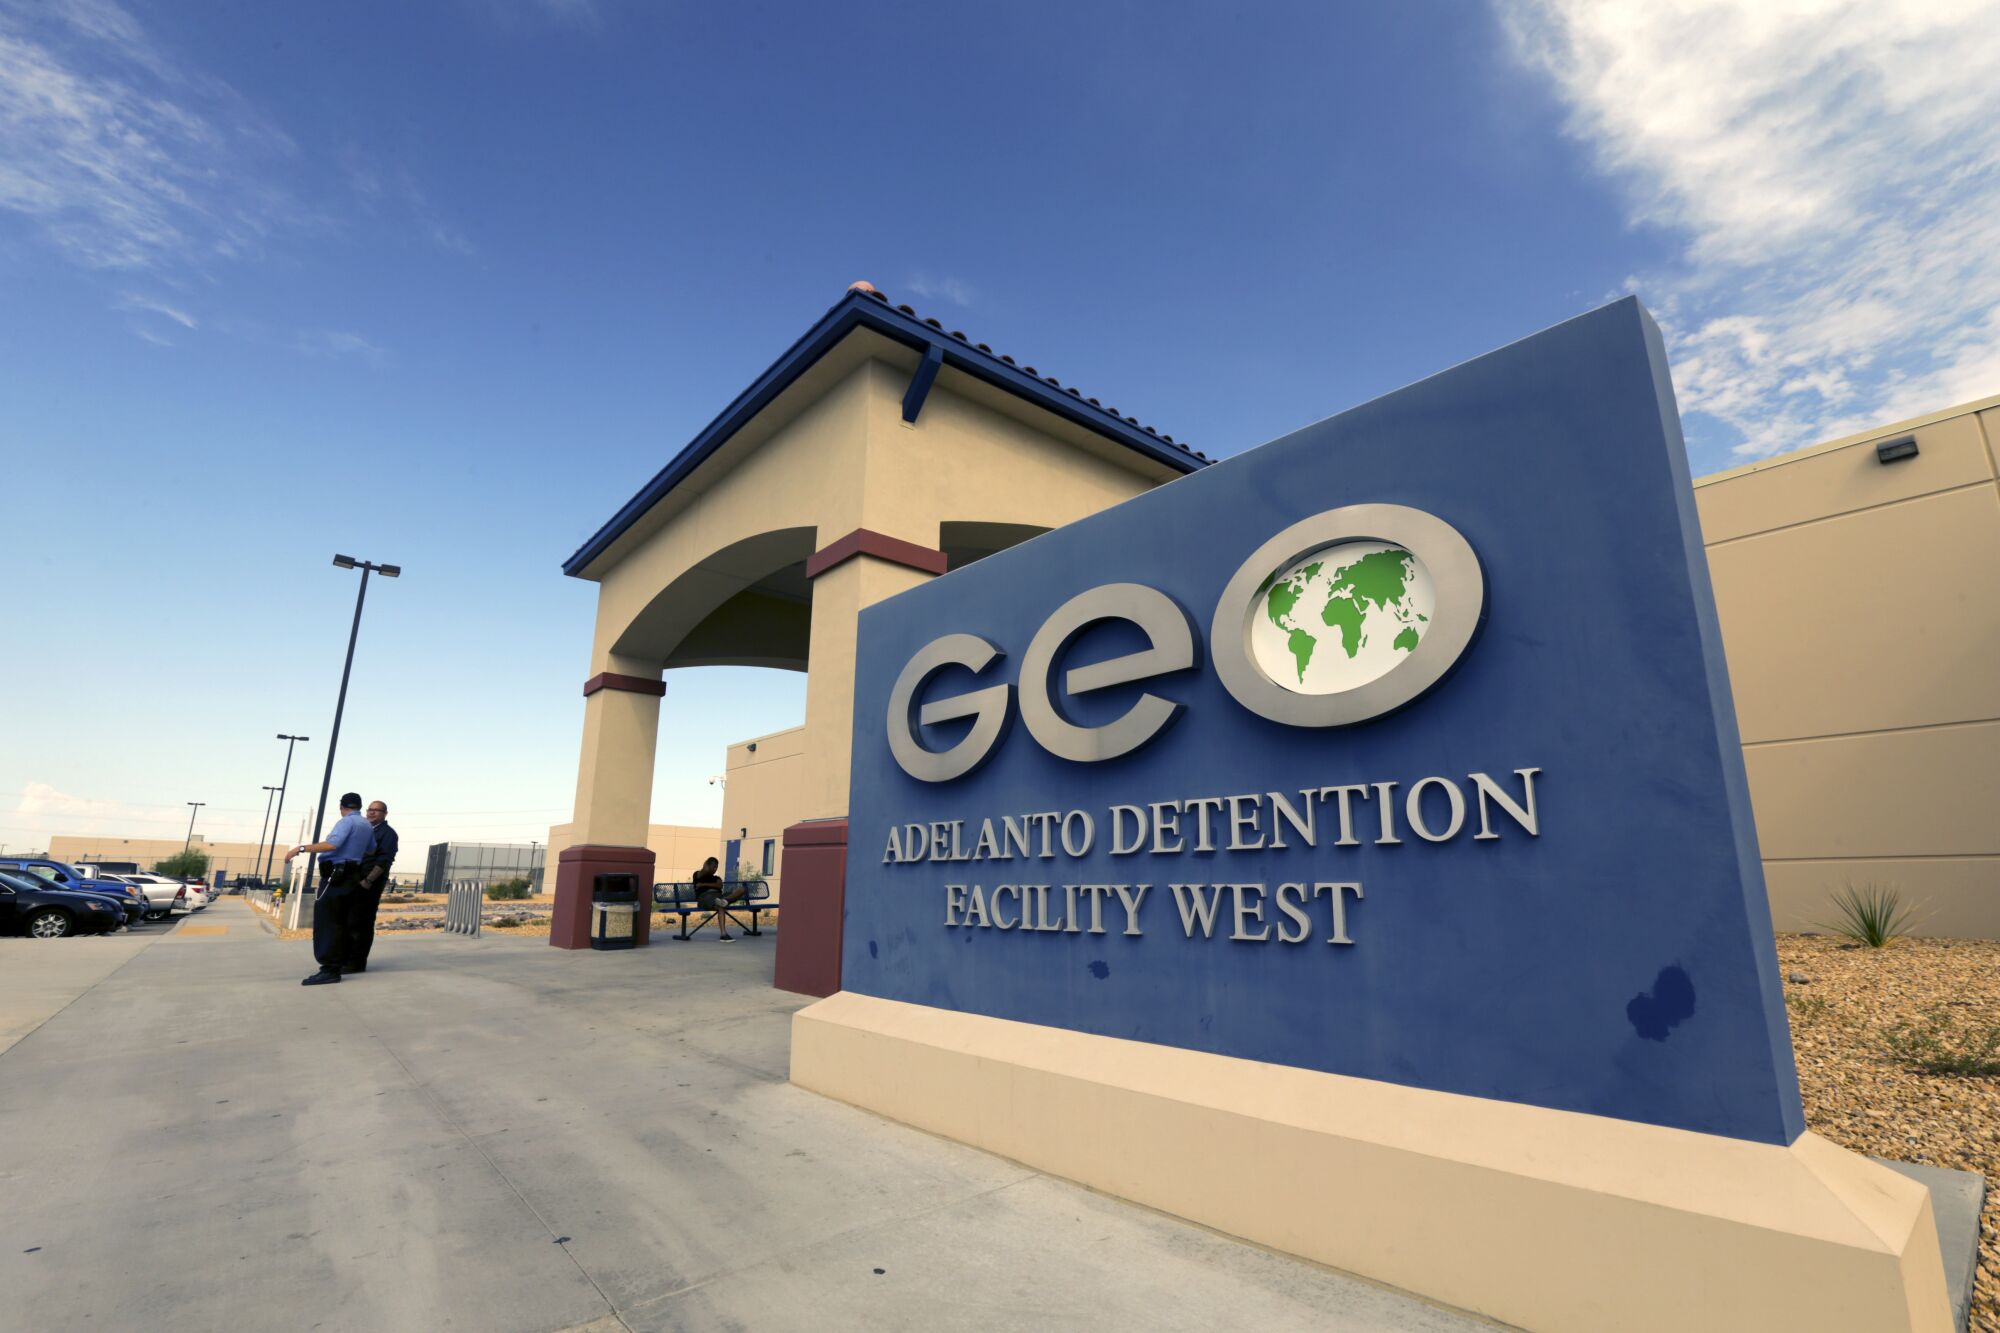 A blue sign that reads GEO Adelanto Detention Facility West outside a building